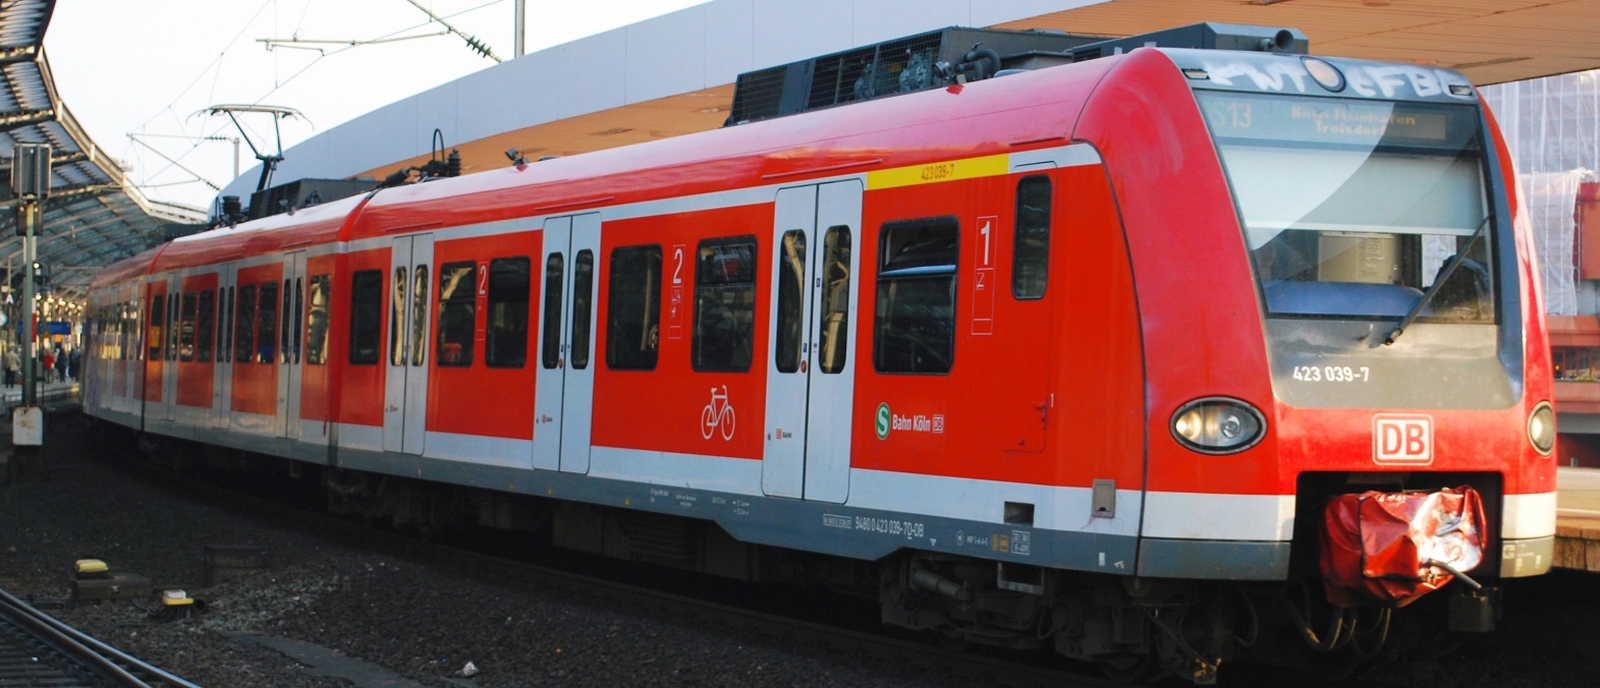 423 039 in May 2011 in Cologne